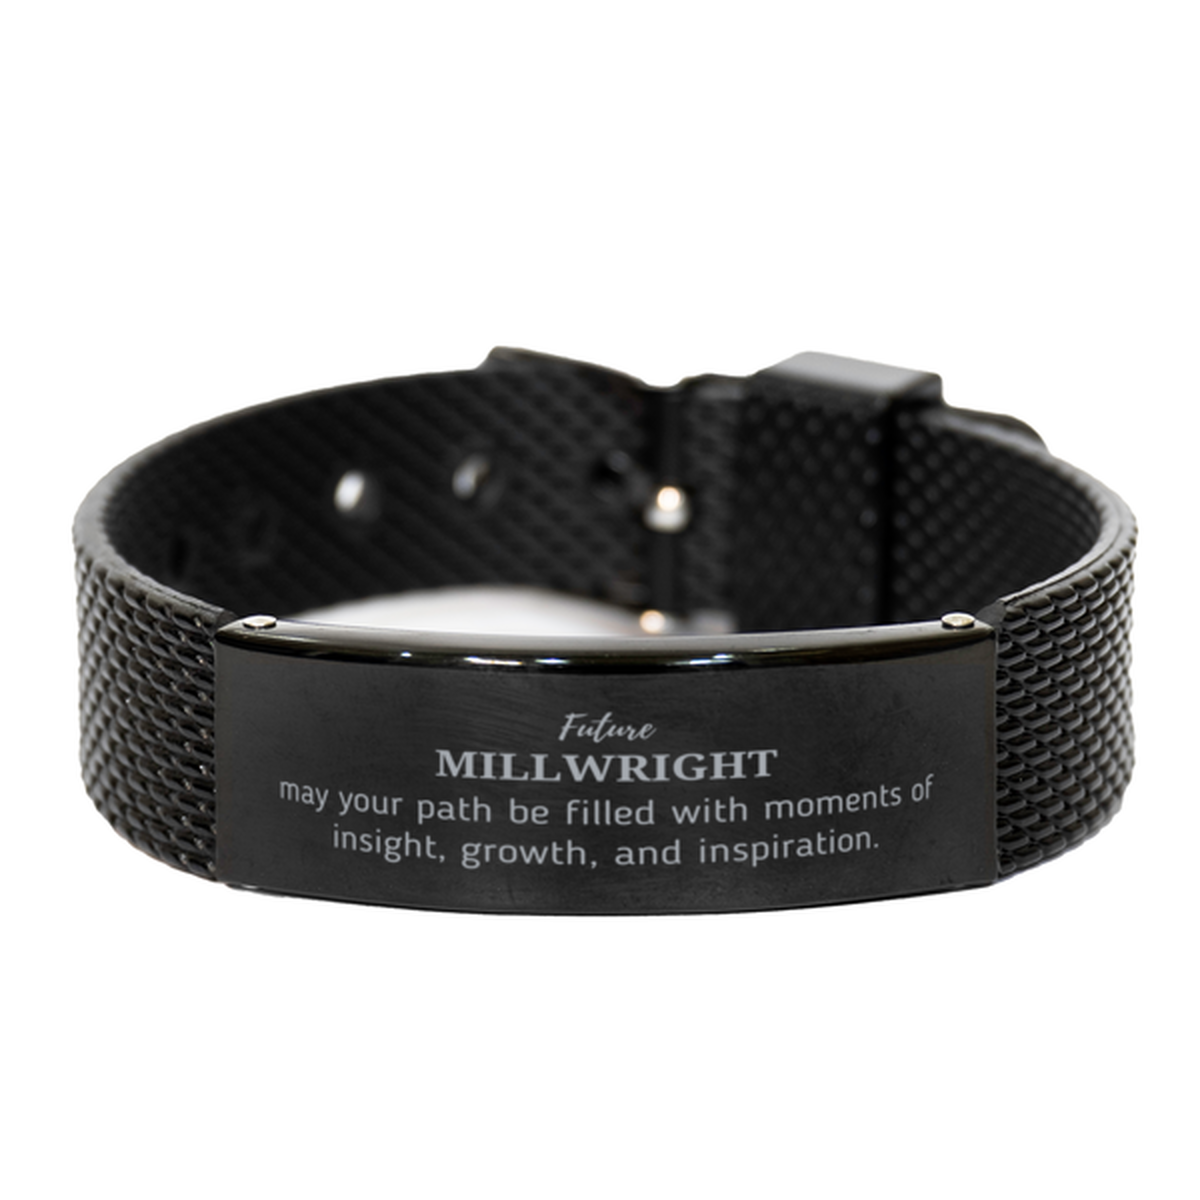 Future Millwright Gifts, May your path be filled with moments of insight, Graduation Gifts for New Millwright, Christmas Unique Black Shark Mesh Bracelet For Men, Women, Friends